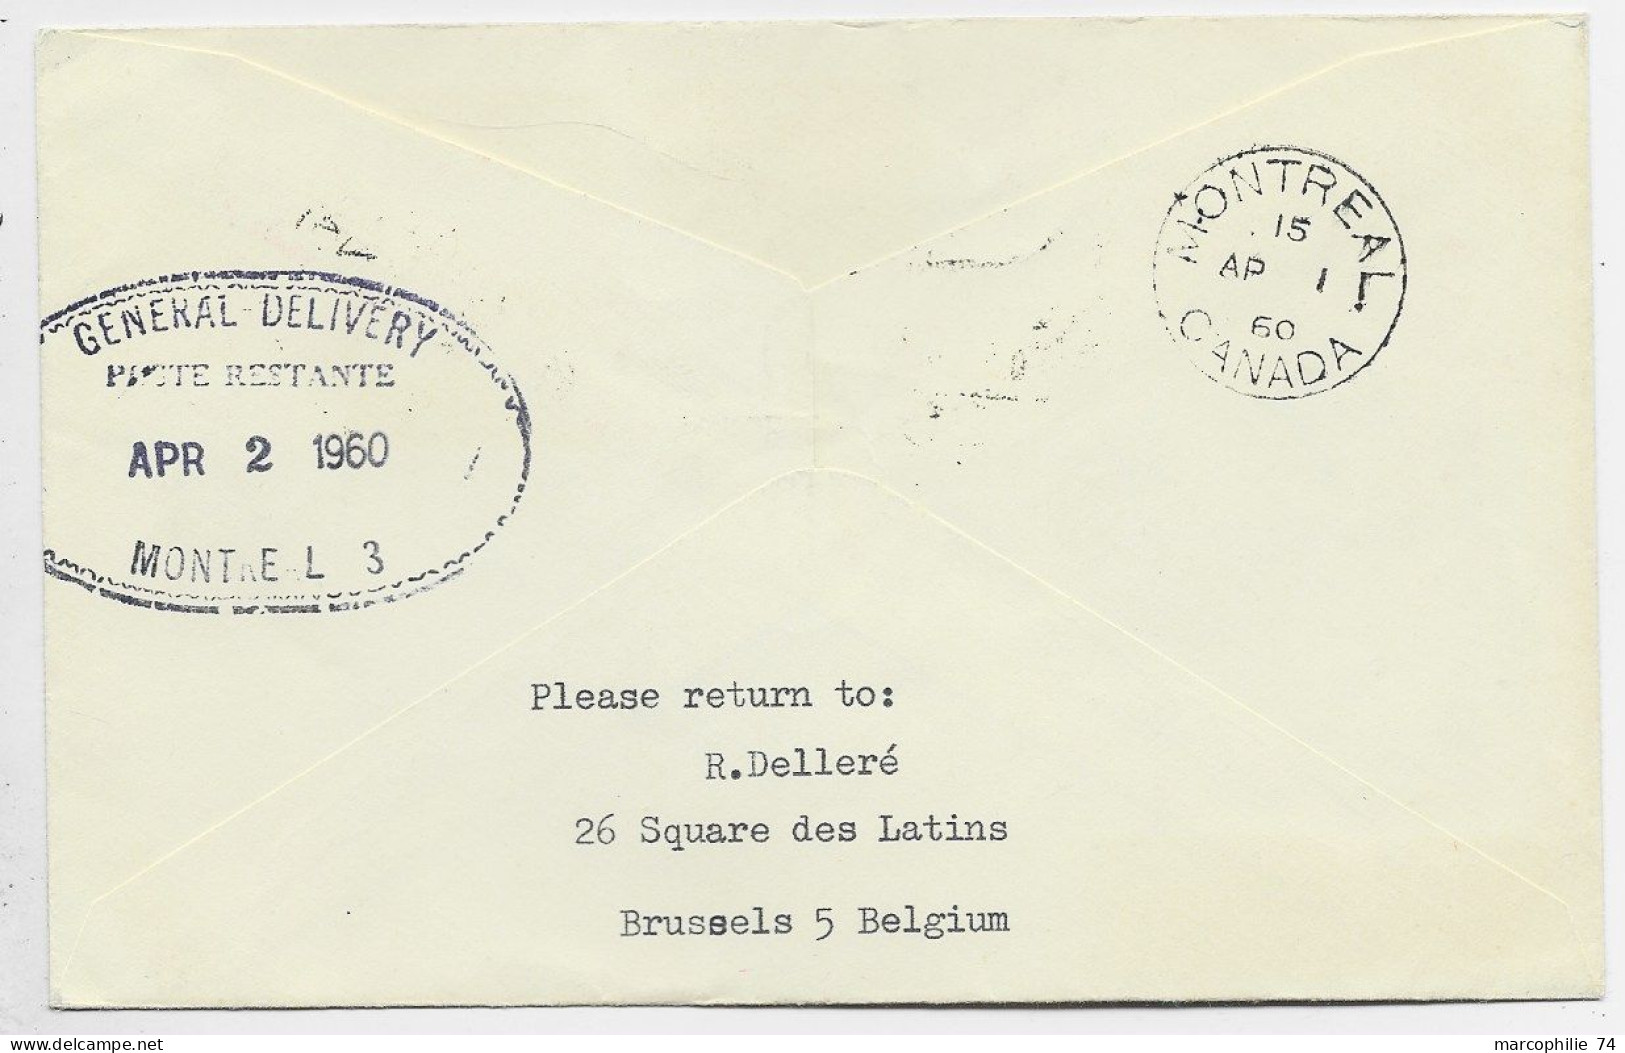 LUXEMBOURG 1FR+7FR LETTRE COVER LUXEMBOURG VILLE 30.3.1960 AIR MAIL AVION BOEING BRUXELLES MONTREAL CANADA - Covers & Documents